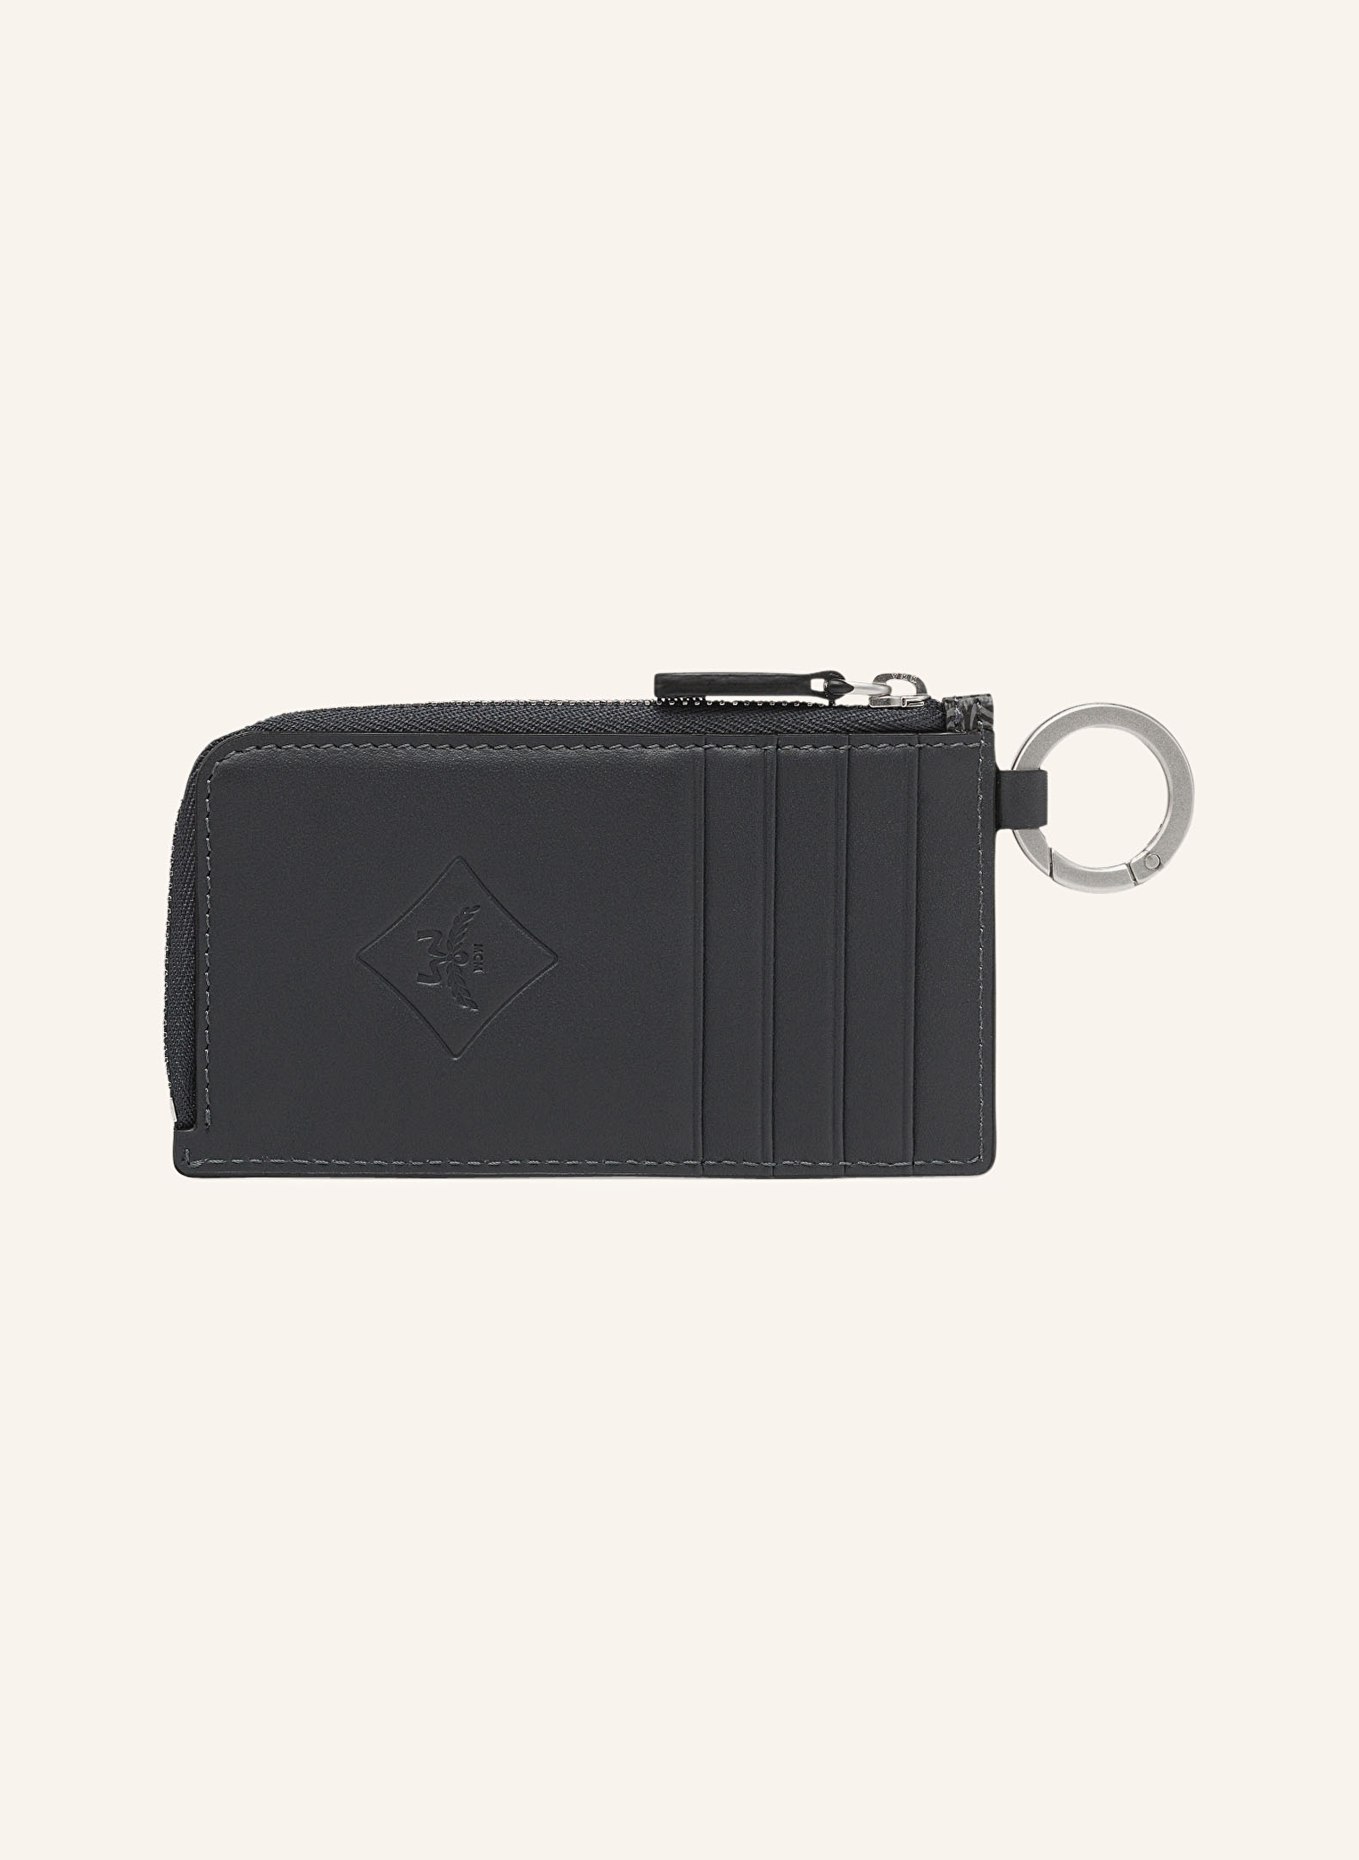 MCM Card case HIMMEL with coin compartment, Color: DARK GRAY (Image 2)